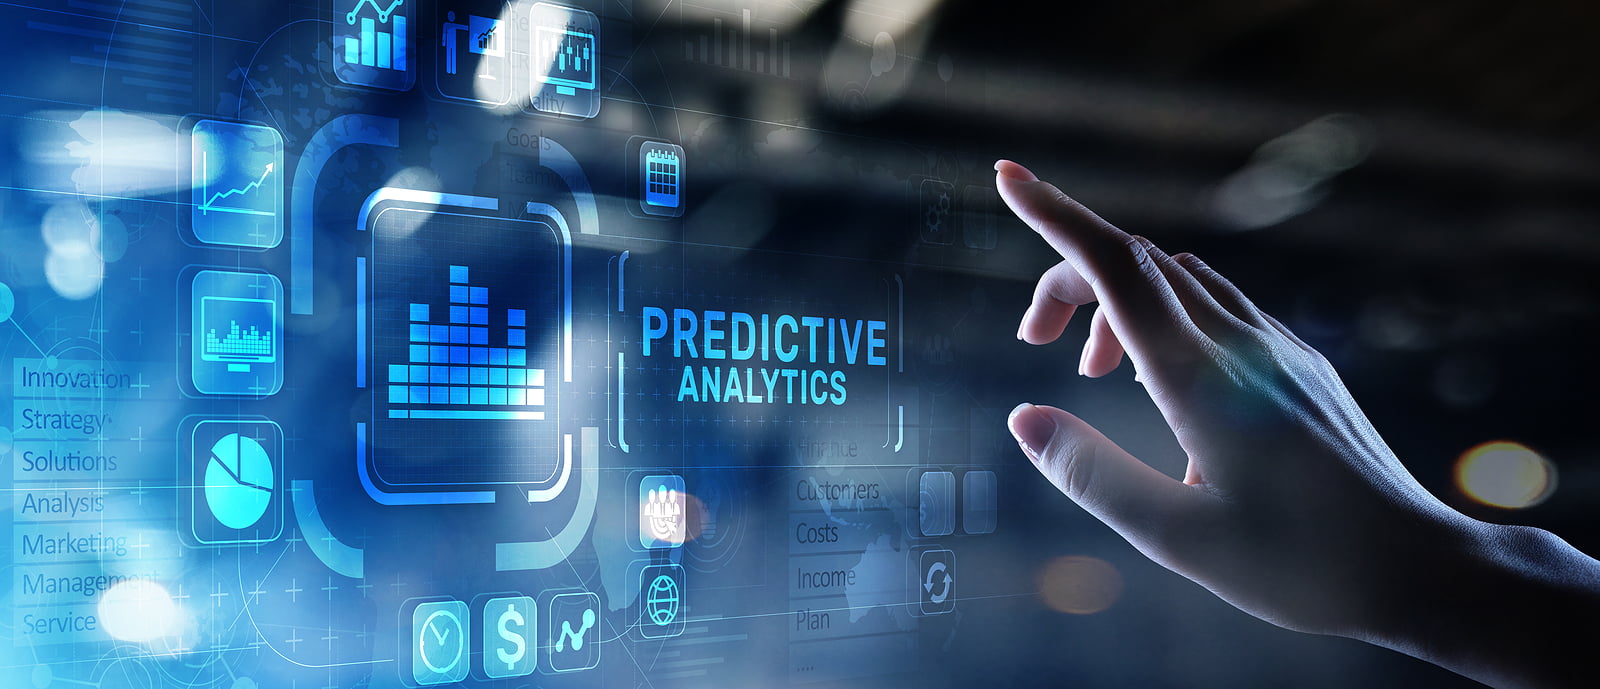 Global Predictive Analytics Market Opportunities and Trends 2022-2028